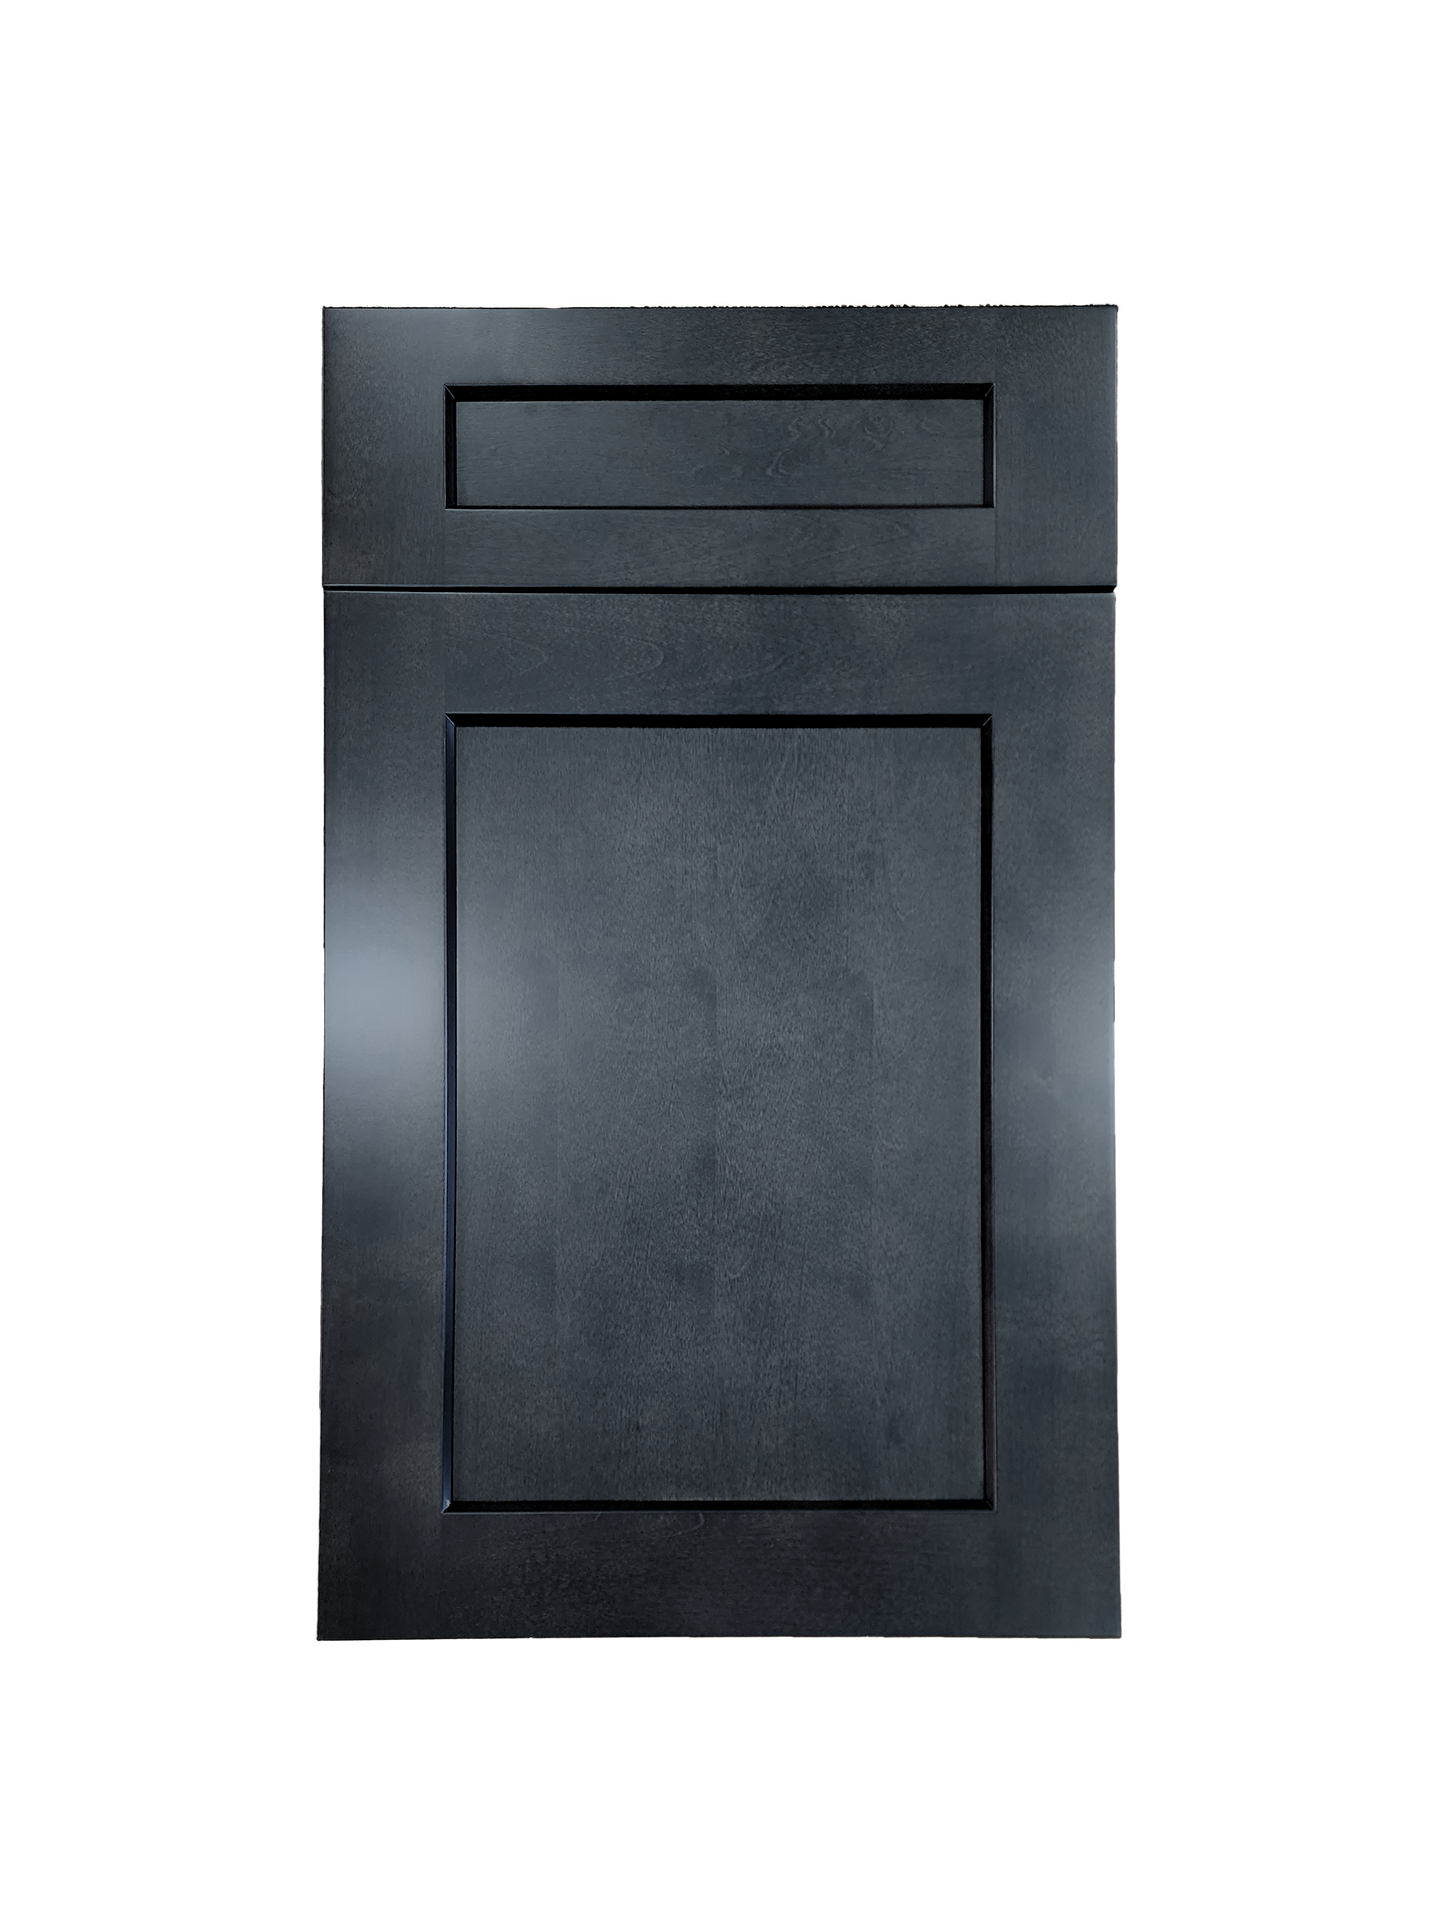 Stormy Grey Wall Cabinet 33 inches wide 12 inches deep 15 inches tall with Stormy Grey box and Stormy Grey doors